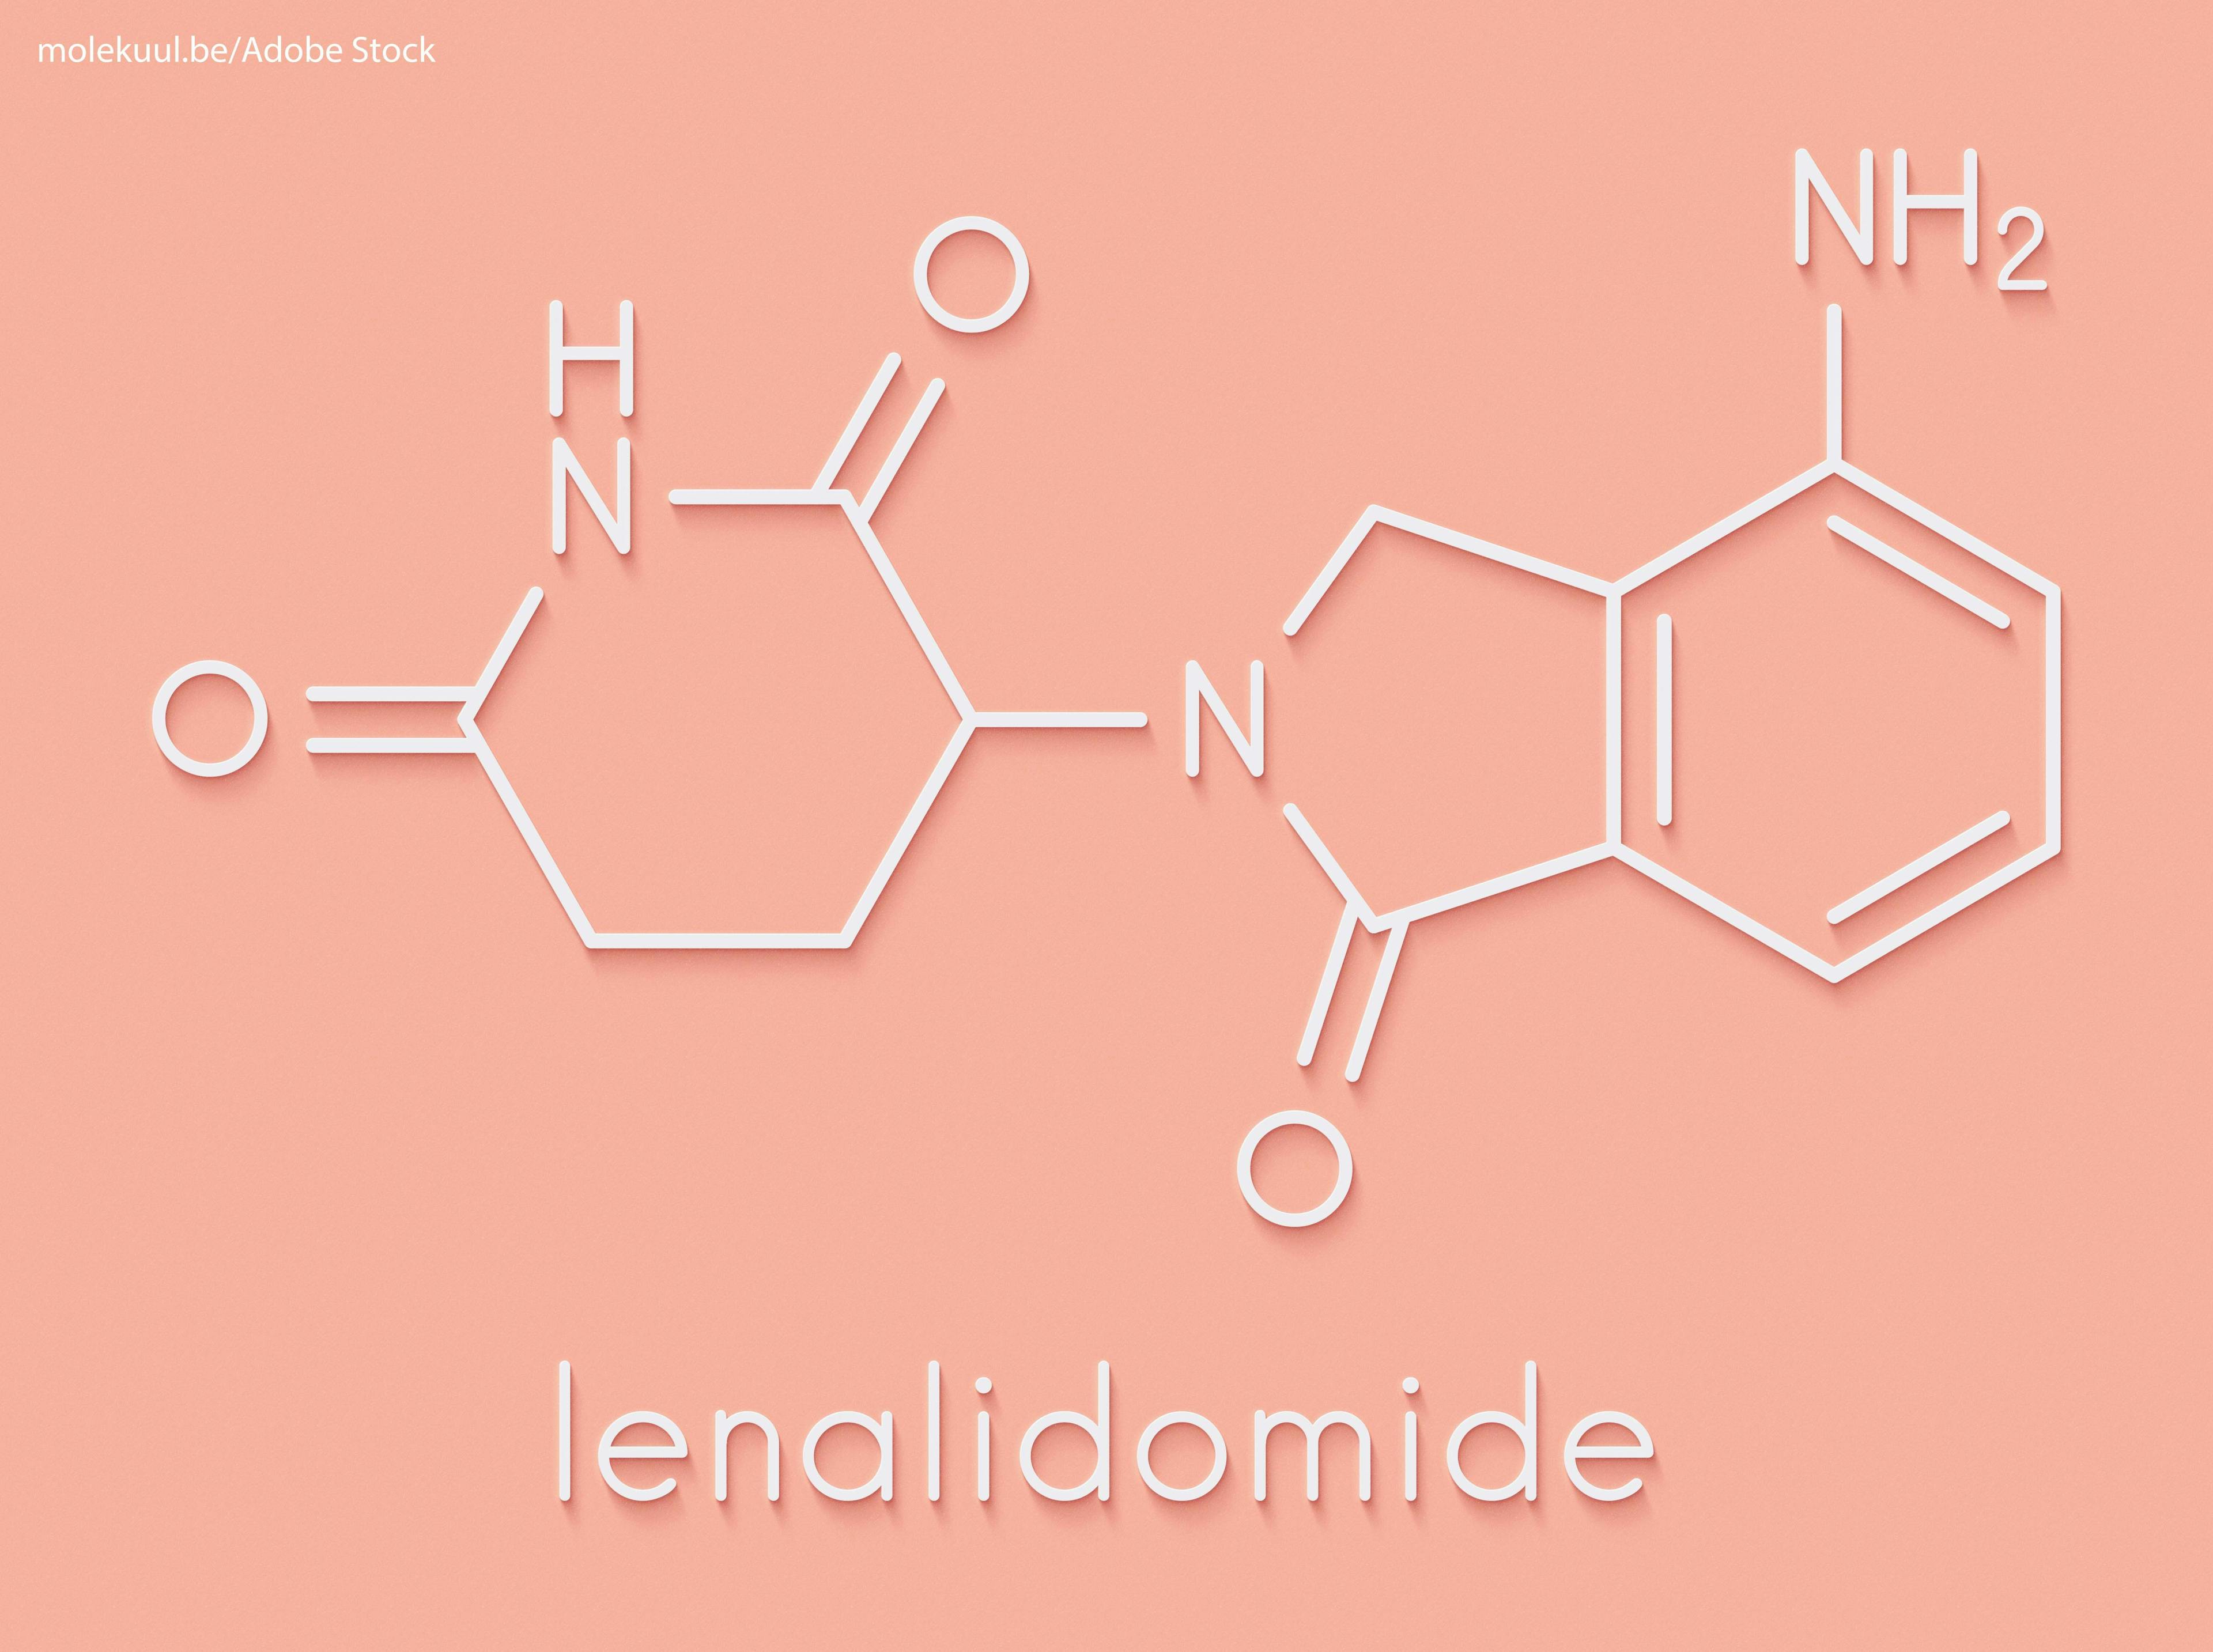 Smoldering Multiple Myeloma Can Be Slowed by Lenalidomide